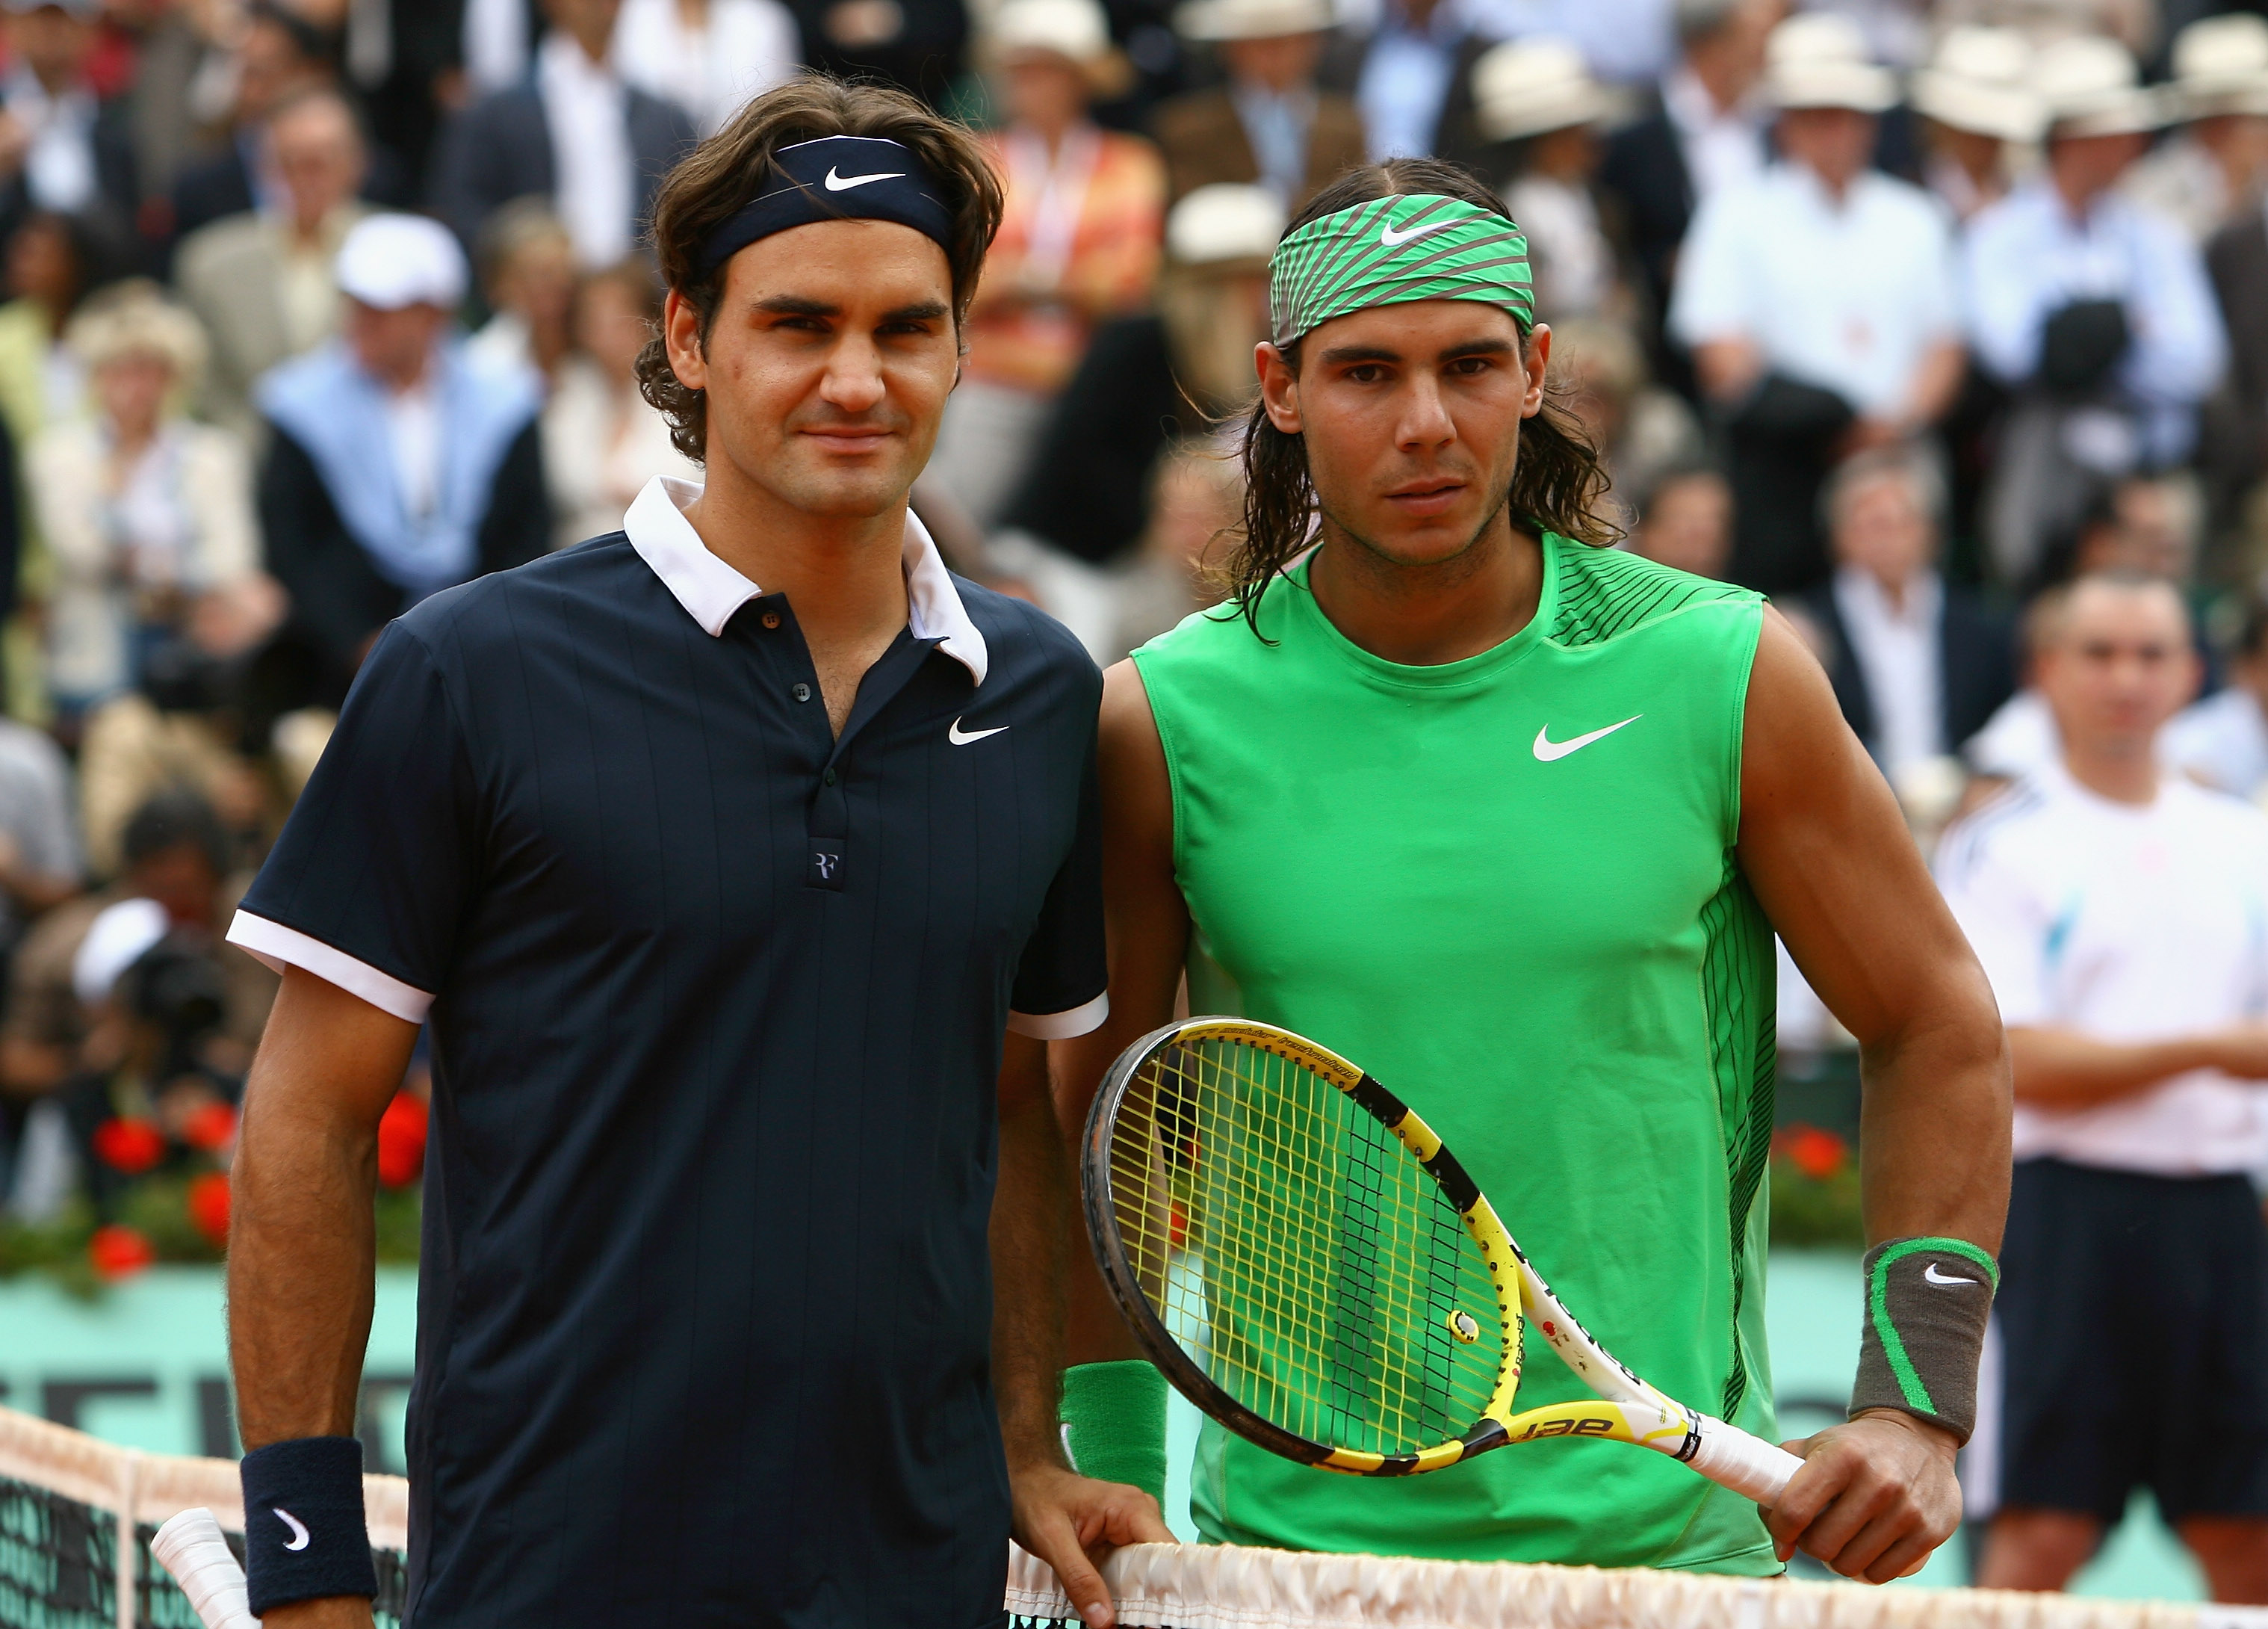 PARIS - JUNE 08:  Roger Federer (L) of Switzerland and Rafael Nadal of Spain line up for a photo before the Men's Singles Final match on day fifteen of the French Open at Roland Garros on June 8, 2008 in Paris, France.  (Photo by Julian Finney/Getty Image